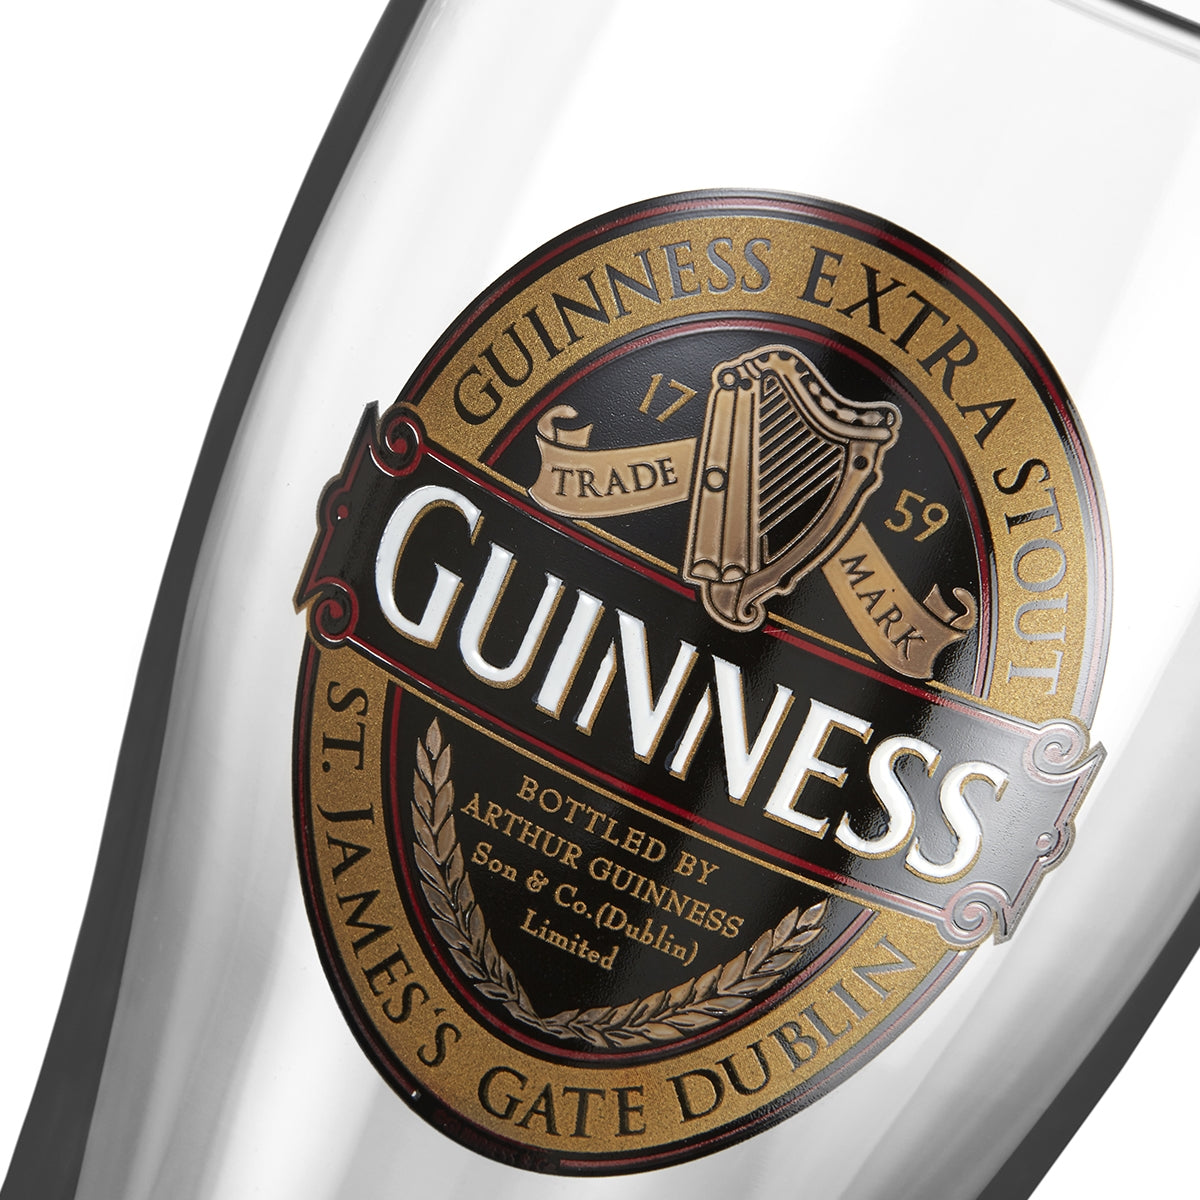 Authentic Guinness UK Classic Collection Pint Glass - 2 Pack glasses featuring the iconic Guinness UK logo.